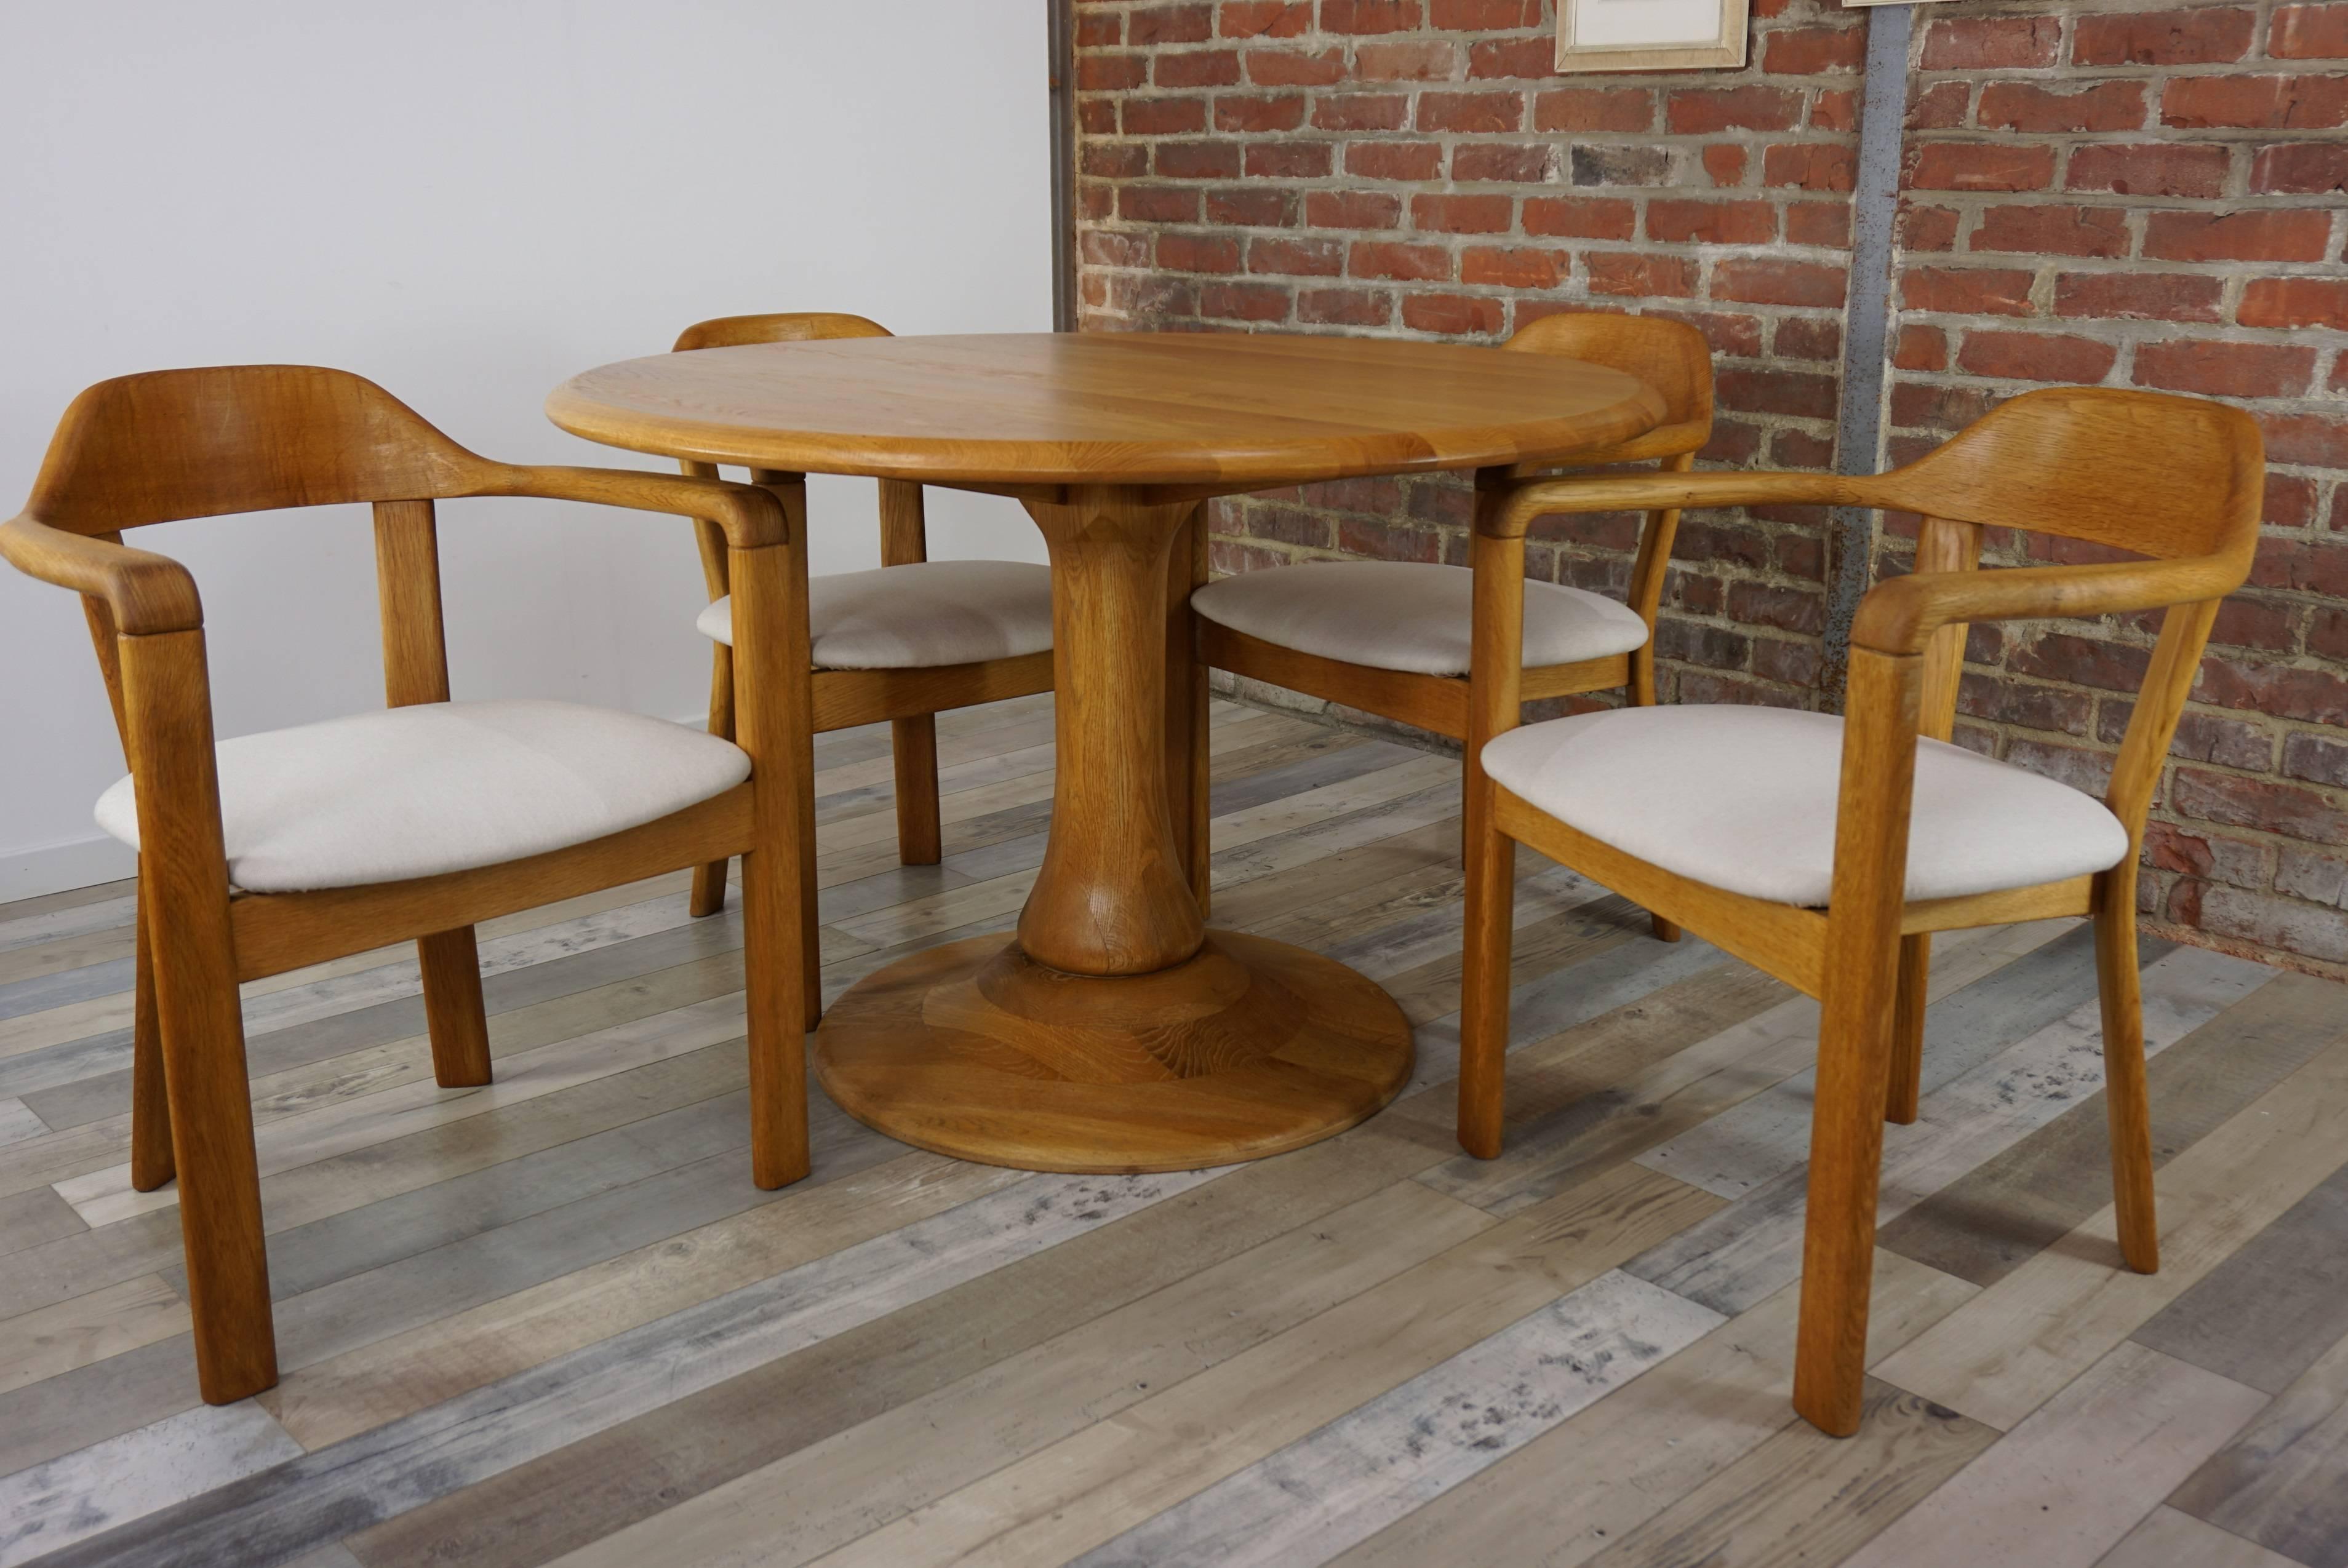 Solid oak dining set Scandinavian style composed of a round solid oak dining table (H 75cm / diam 115cm) with tulip shape foot (diam 70cm) and four matching dining armchairs (H77cm / H seat 47cm / W61cm / D55cm) in solid oak and fabric... All In